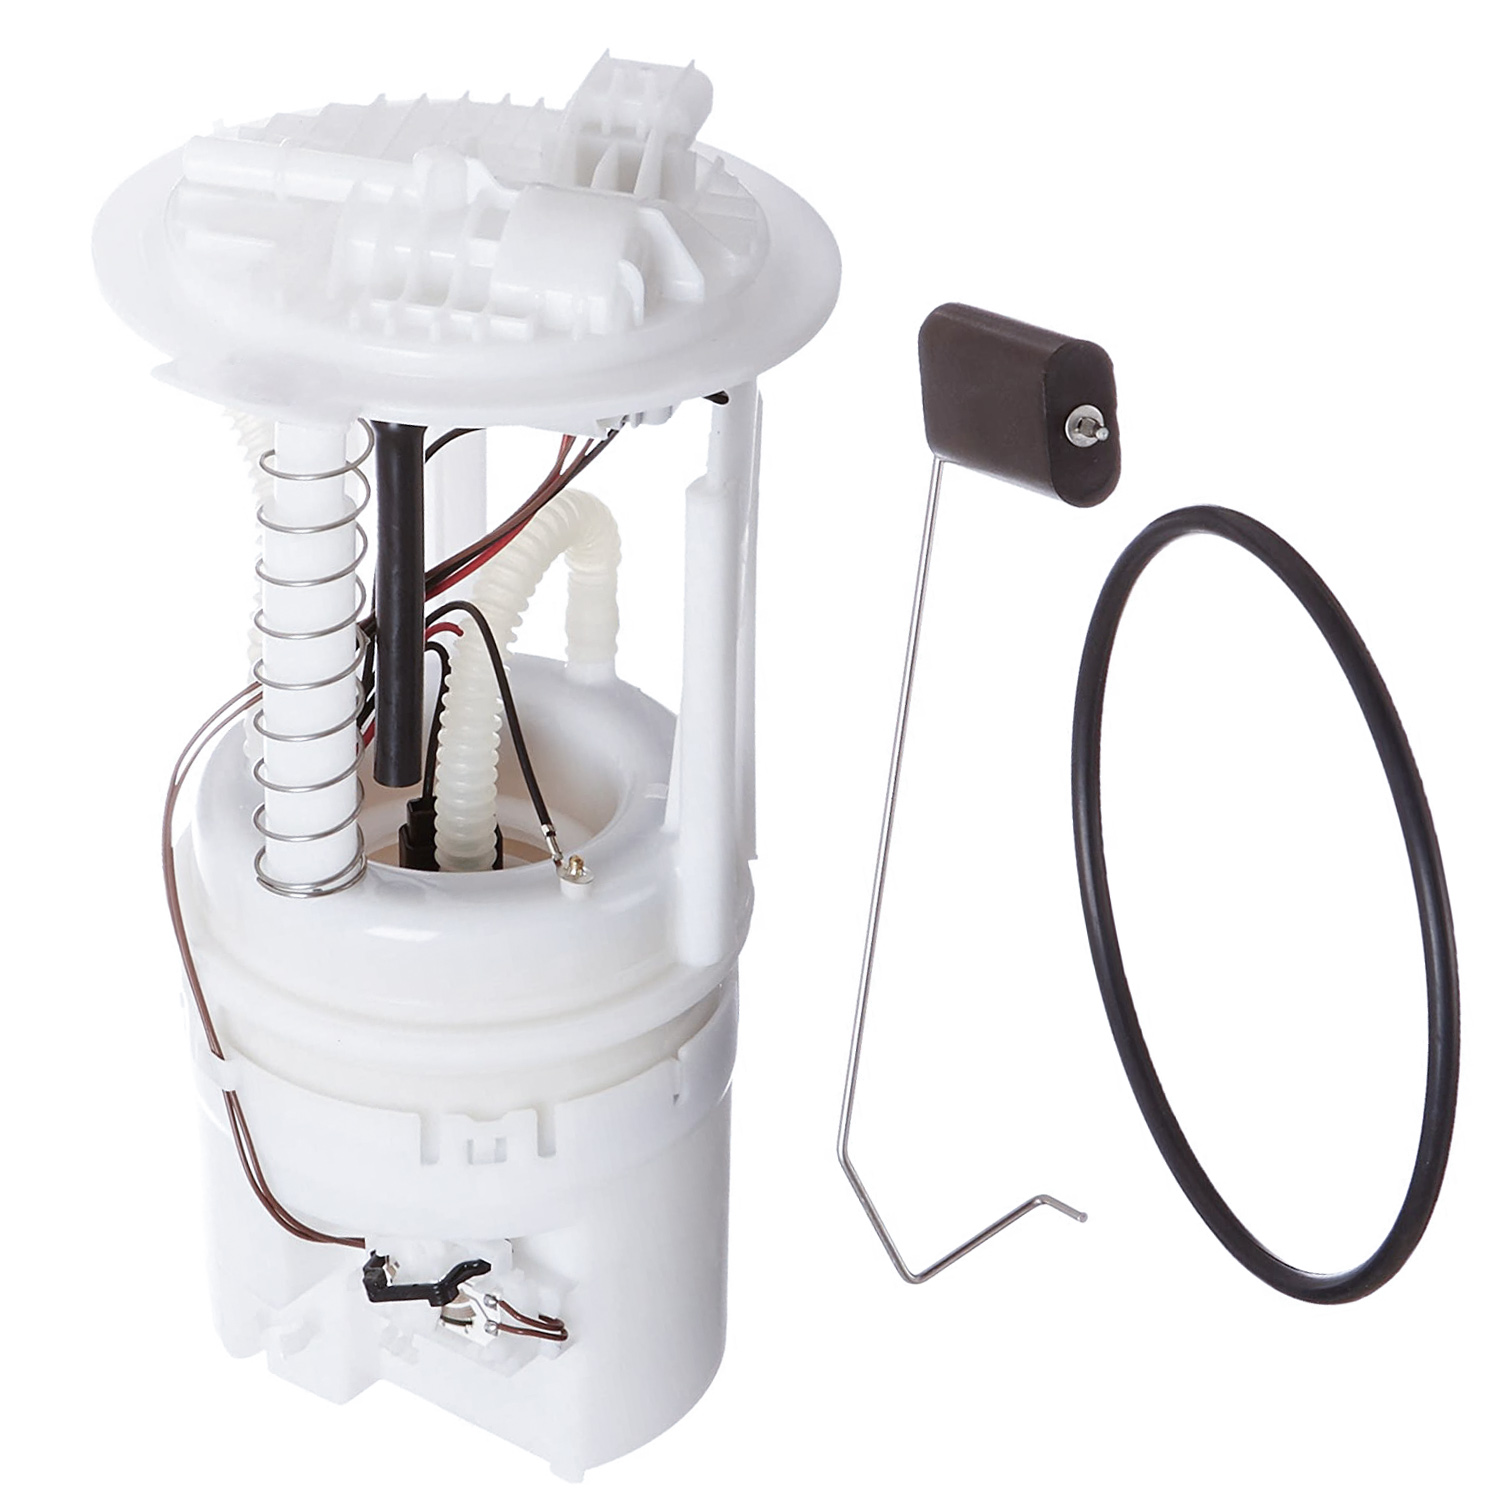 New Fuel Pump Module And Strainer Fits Jeep Commander 4.7L 2006-2009 5143579Aq - image 1 of 1